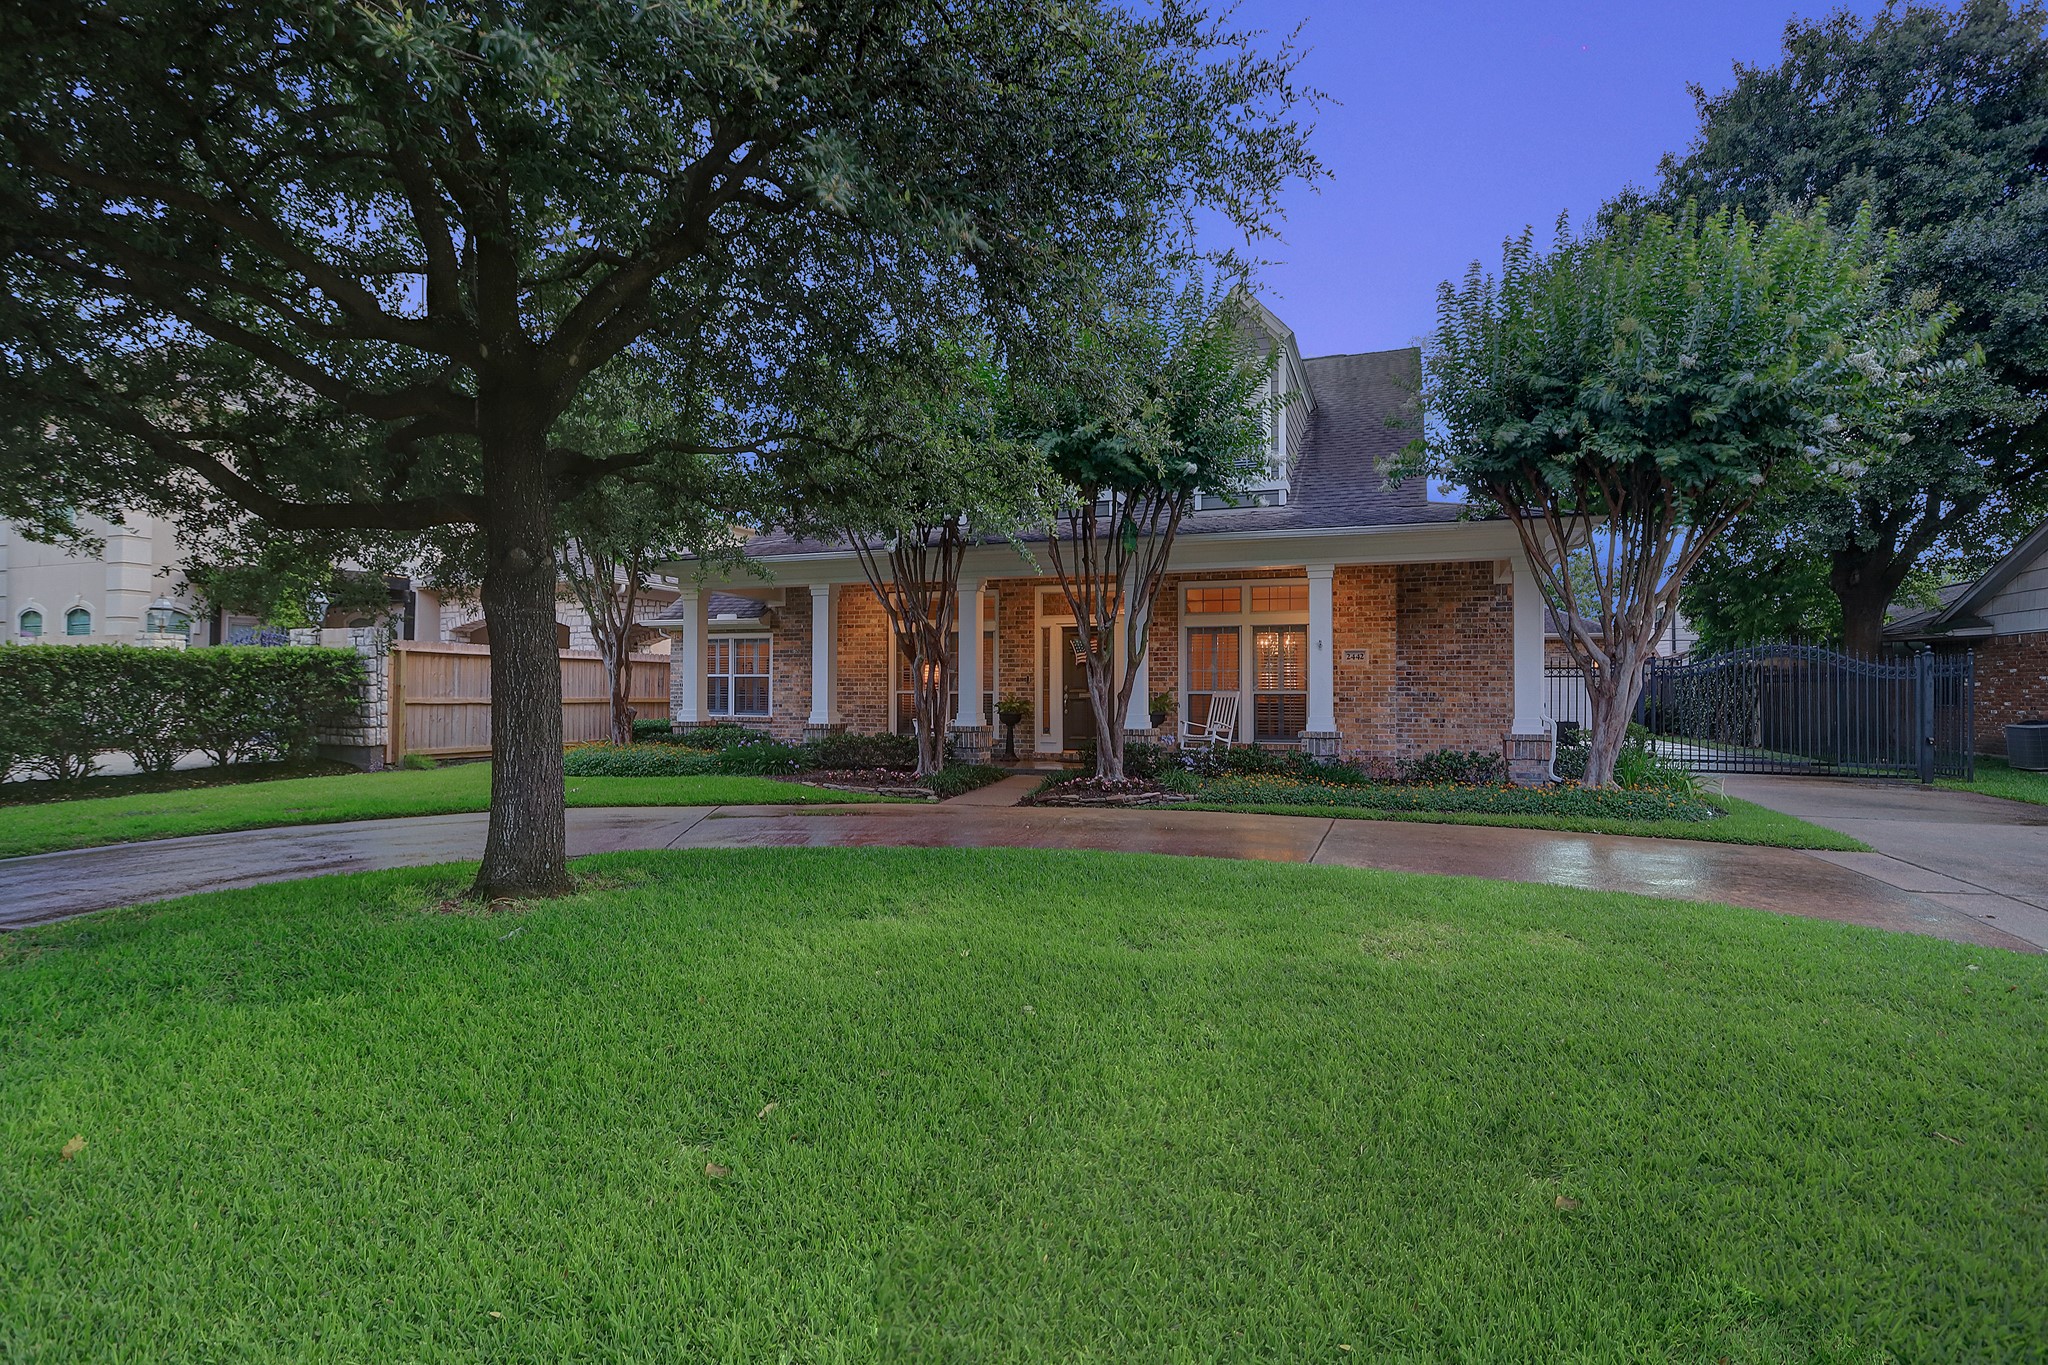 Welcome t 2442 Chimney Rock  - A custom home built in 2000 with single story living in mind.